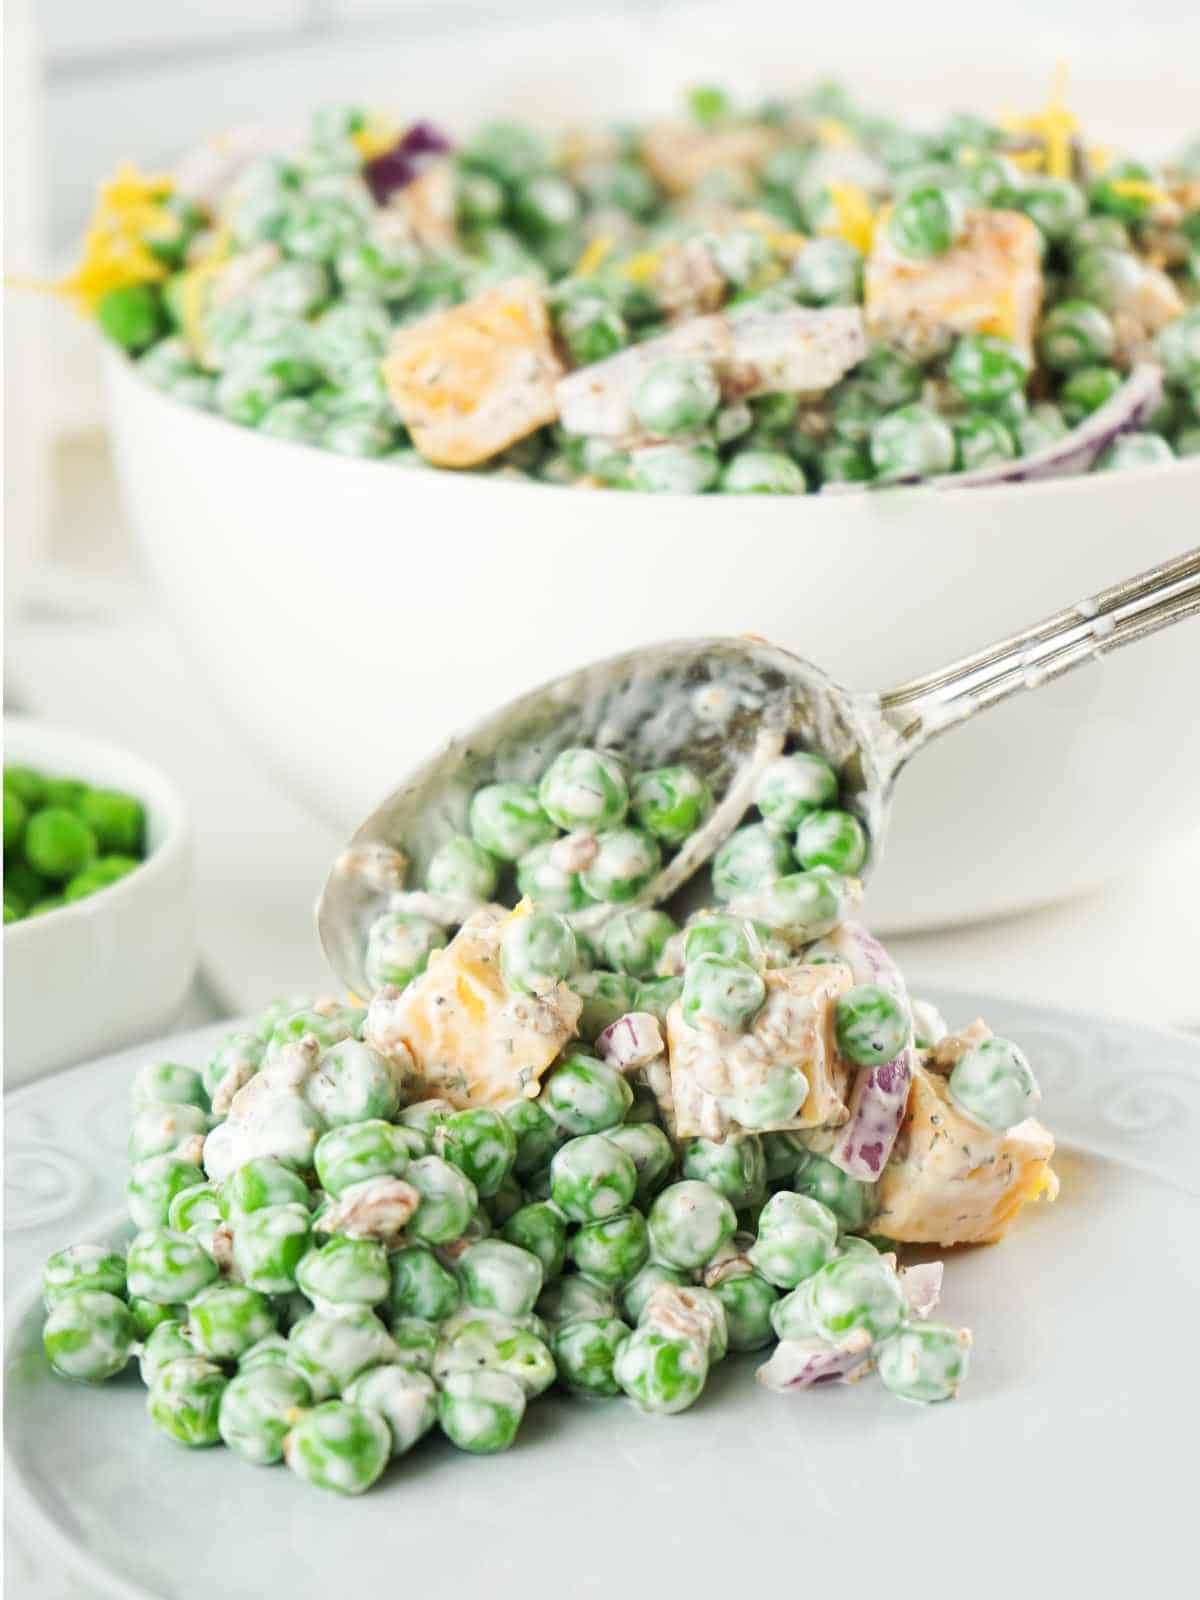 spoonful of English pea salad on a plate with bowl in background.